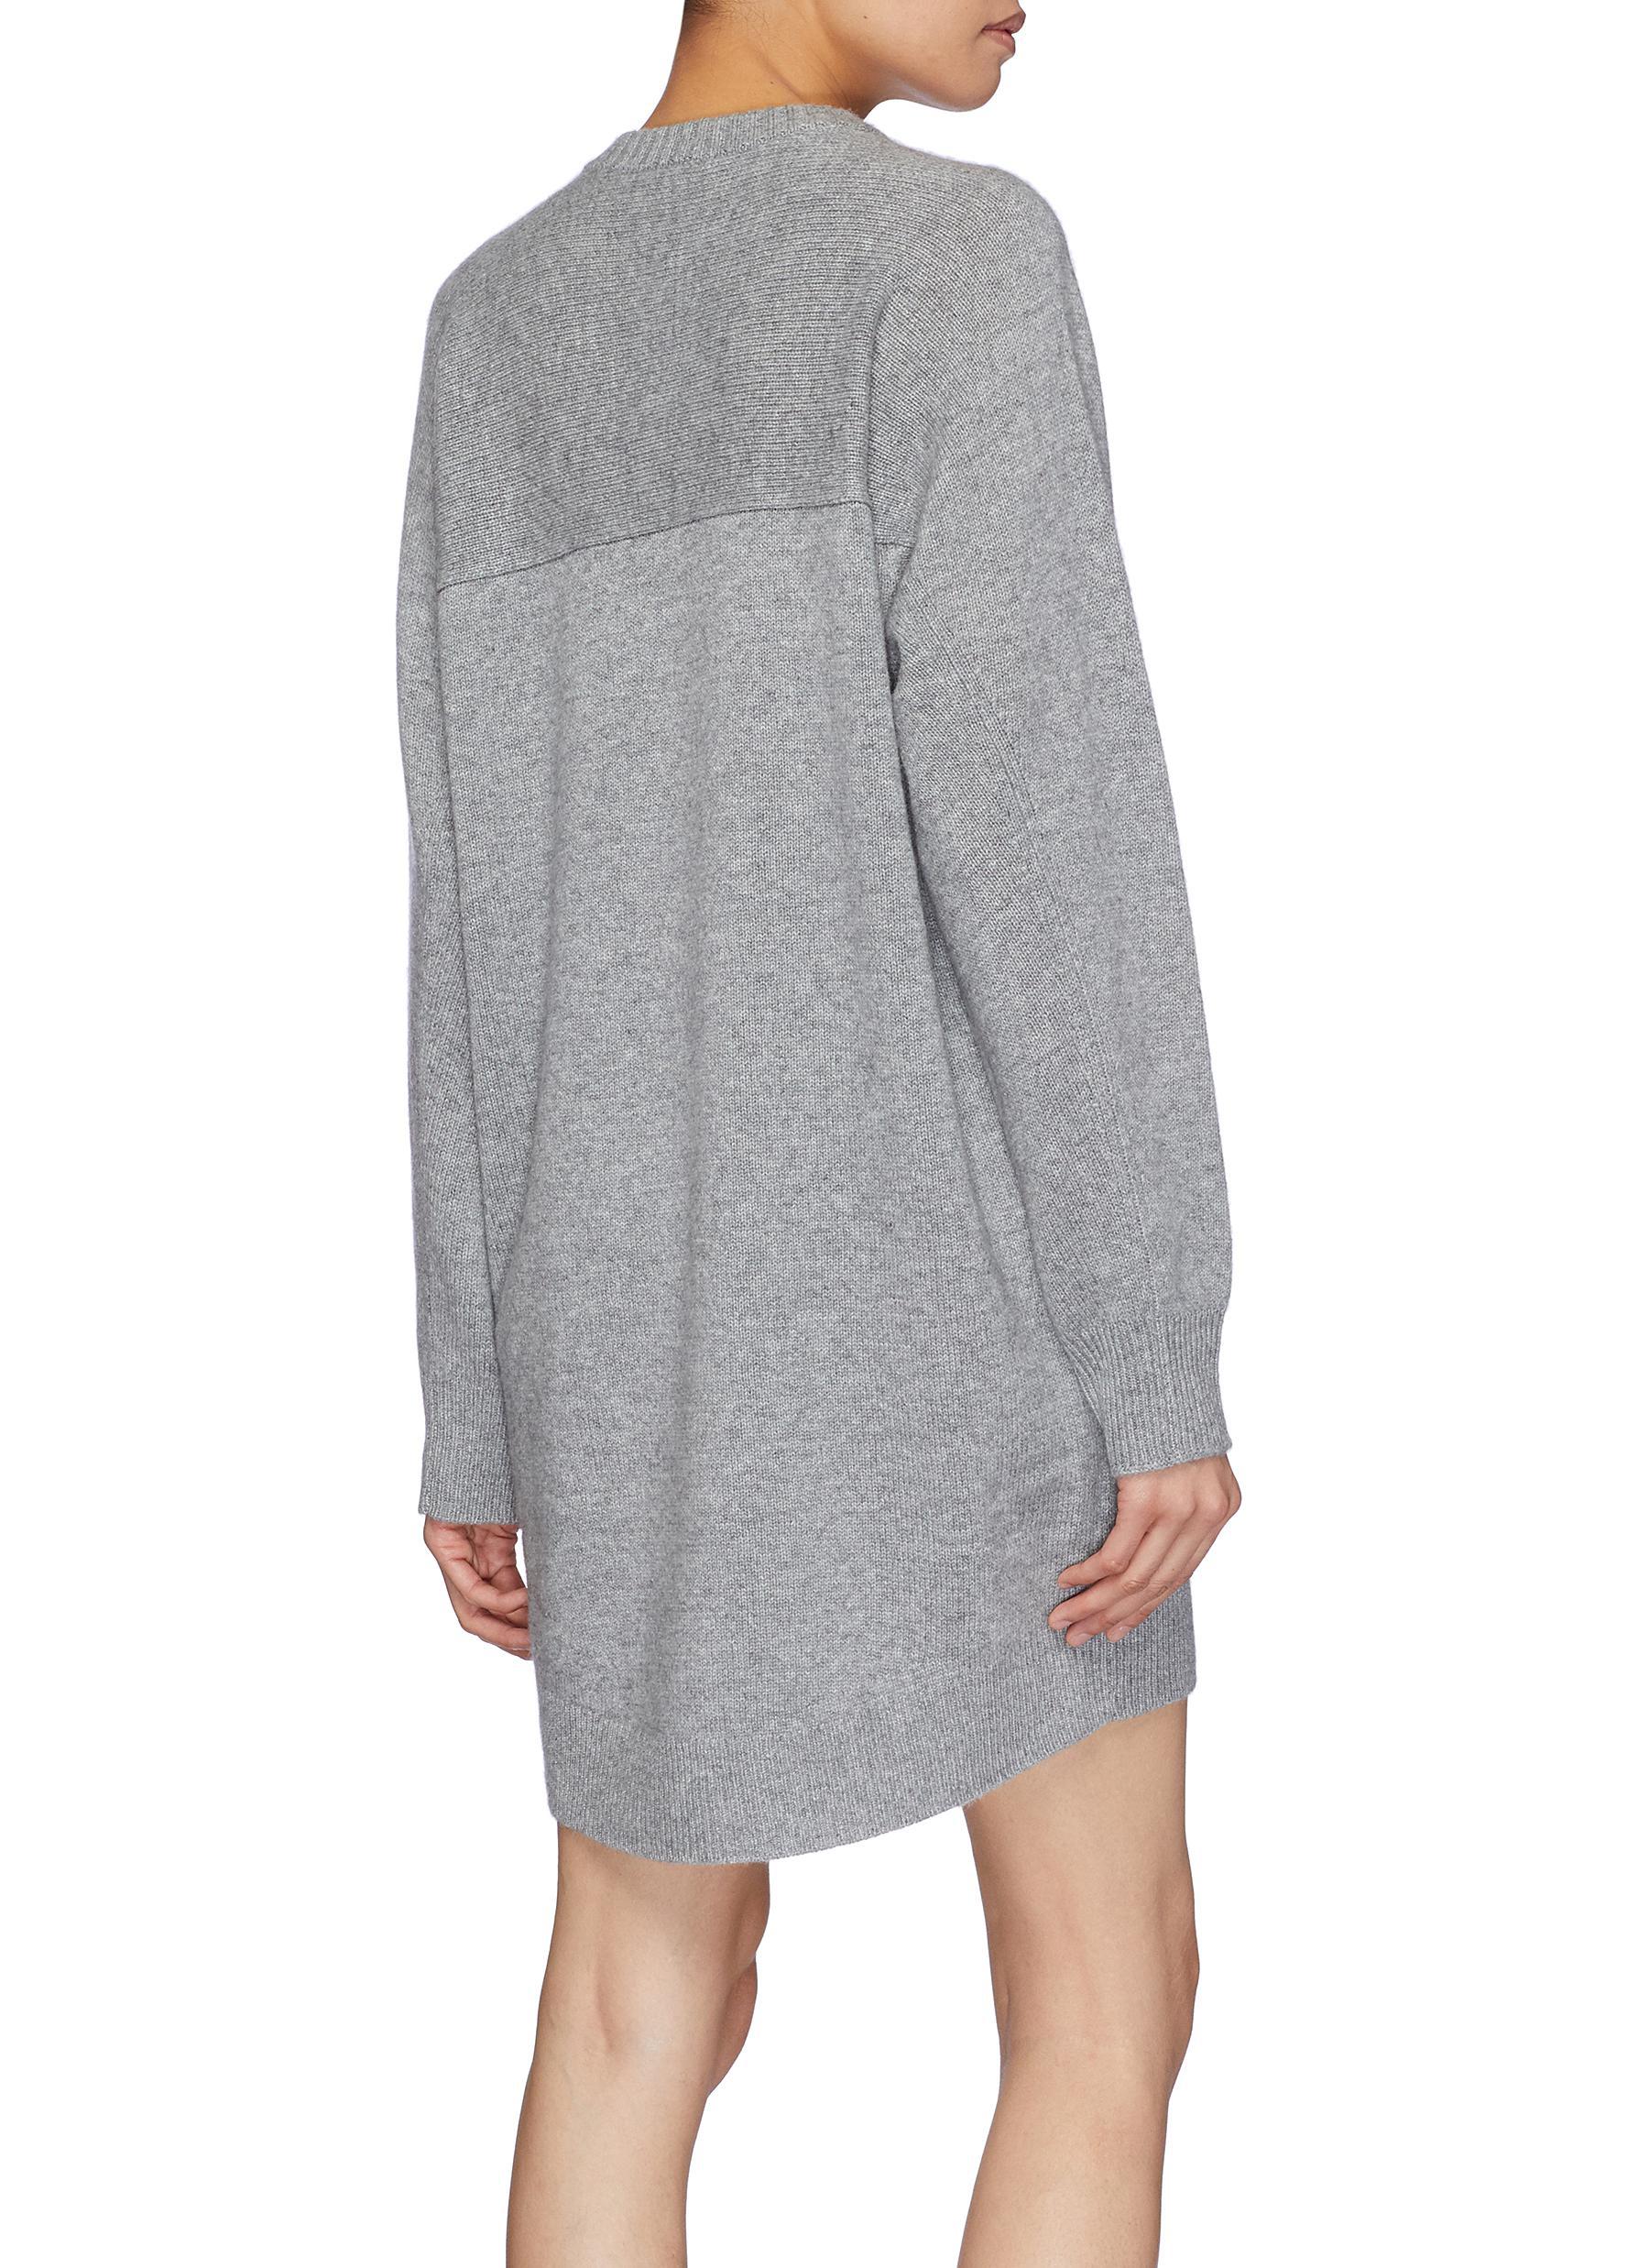 Theory Cashmere Oversized Sweater Dress in Gray for Men - Lyst